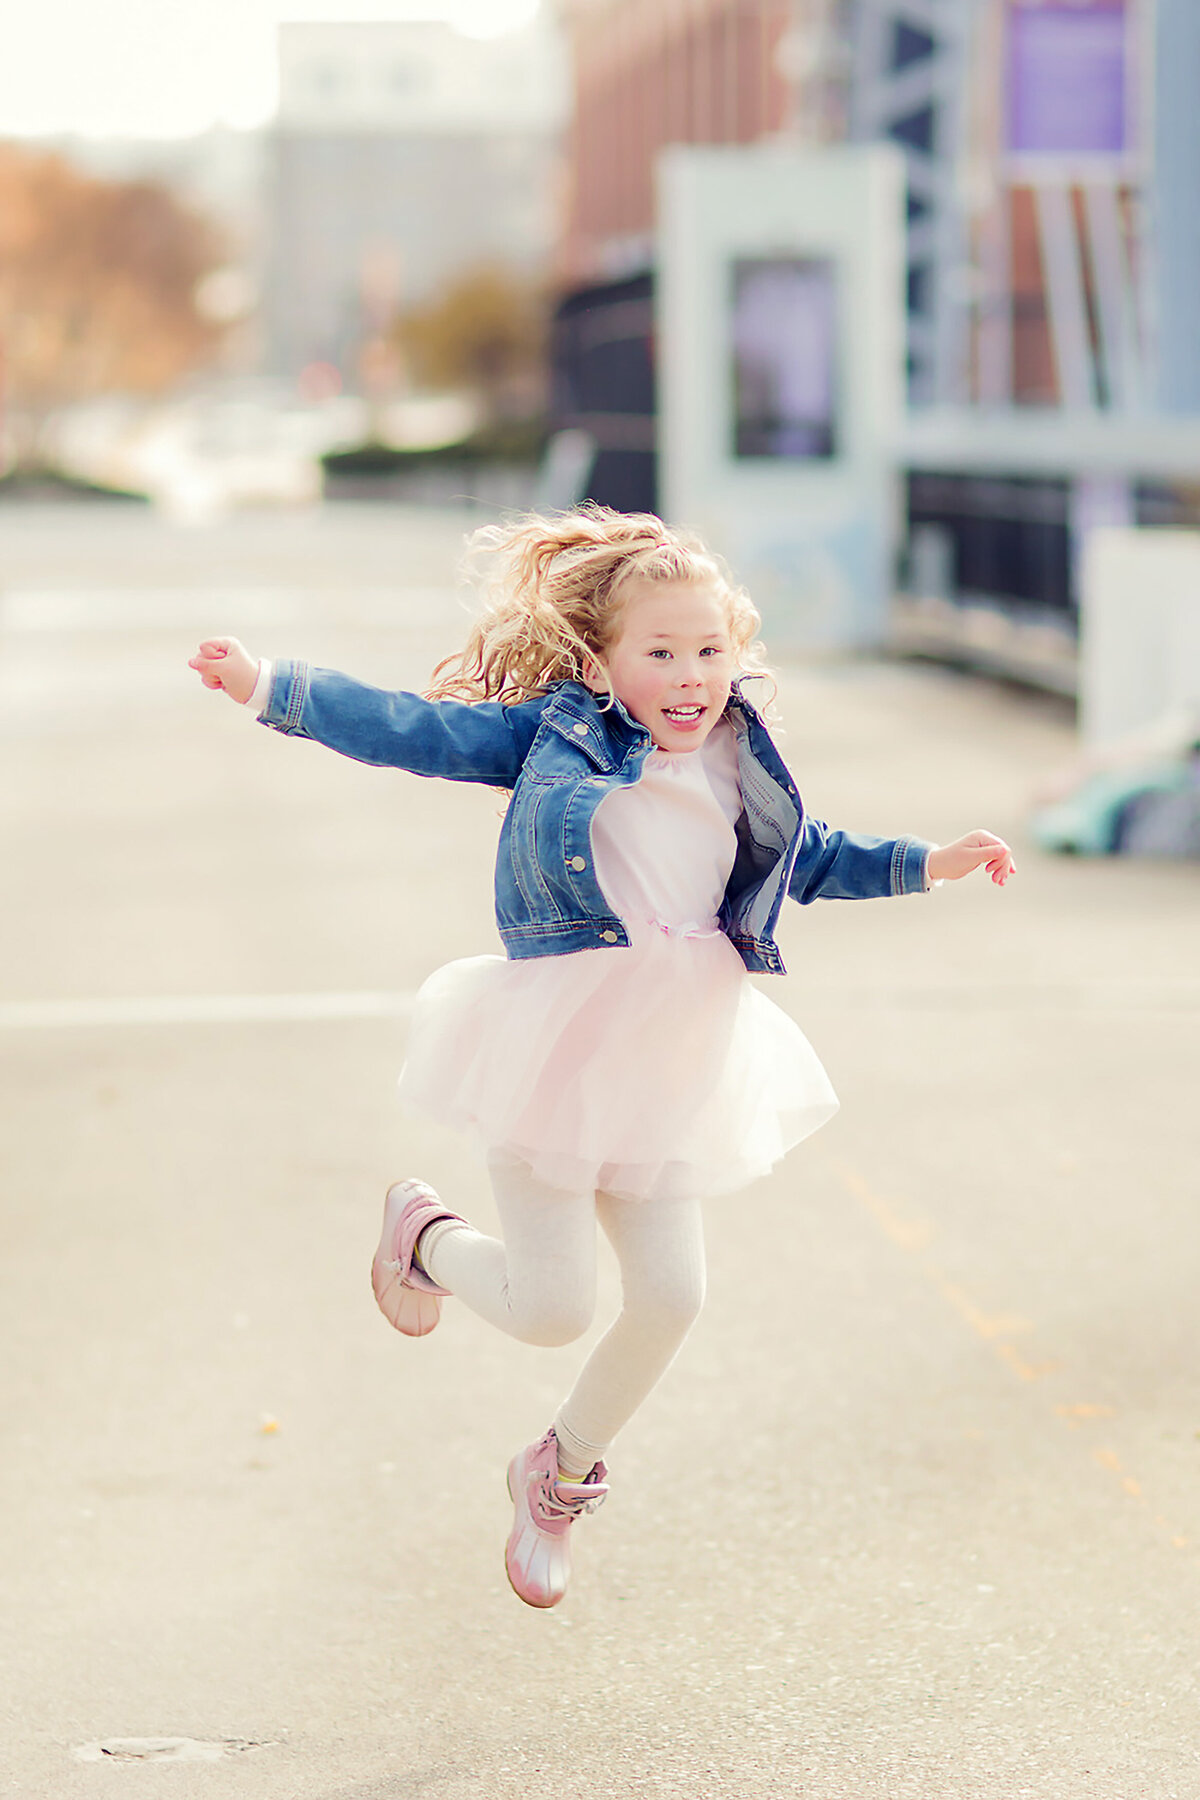 Young girl with curly blonde hair jumps gleefully in downtown Cincinnati. She's wearing a denim jacket with a tutu and pink boots.